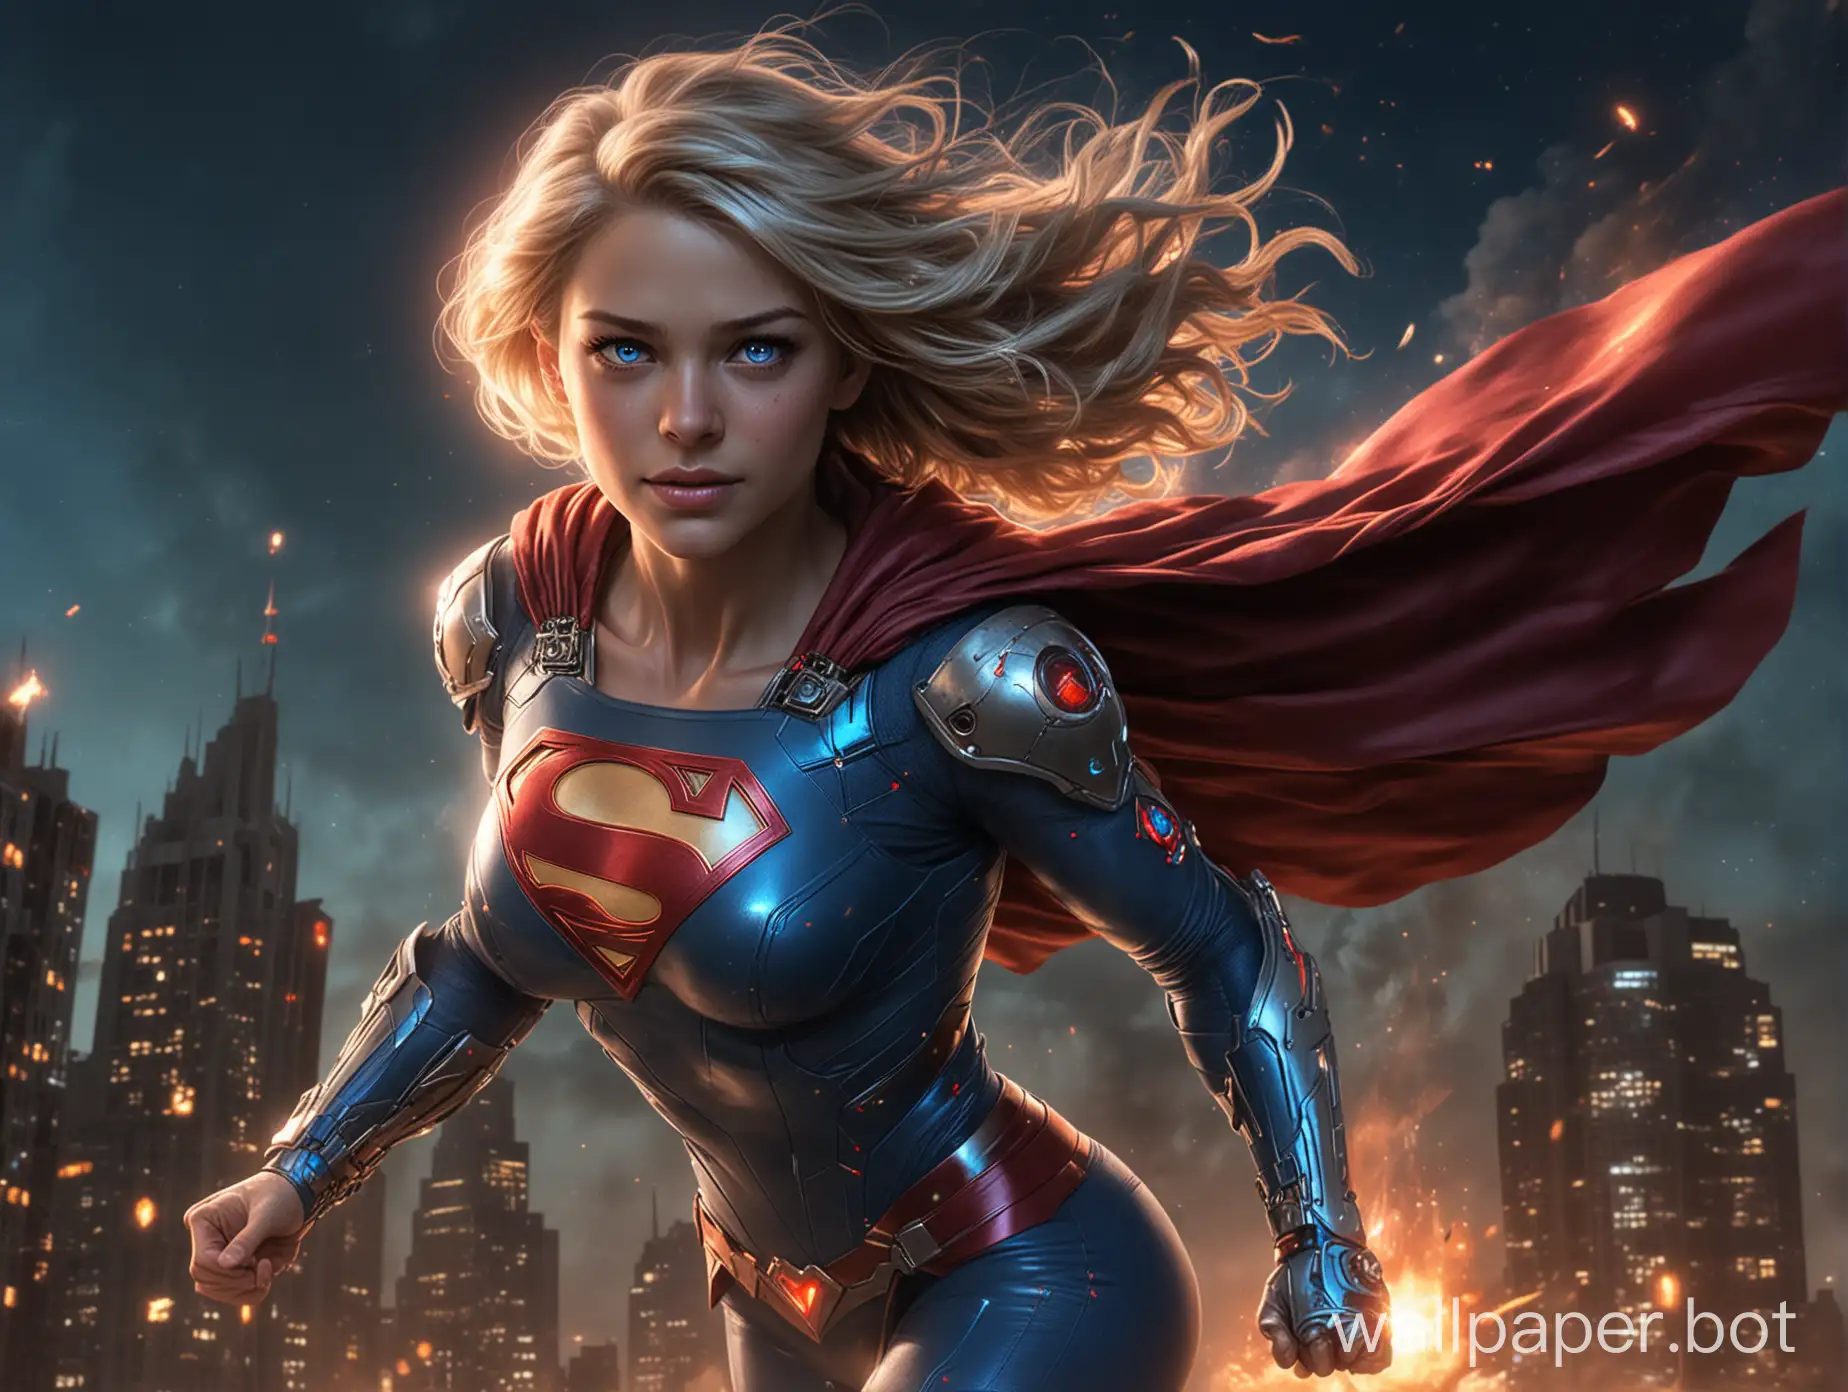 Supergirl-Cyborg-Soars-Over-Cityscape-with-Fiery-Hair